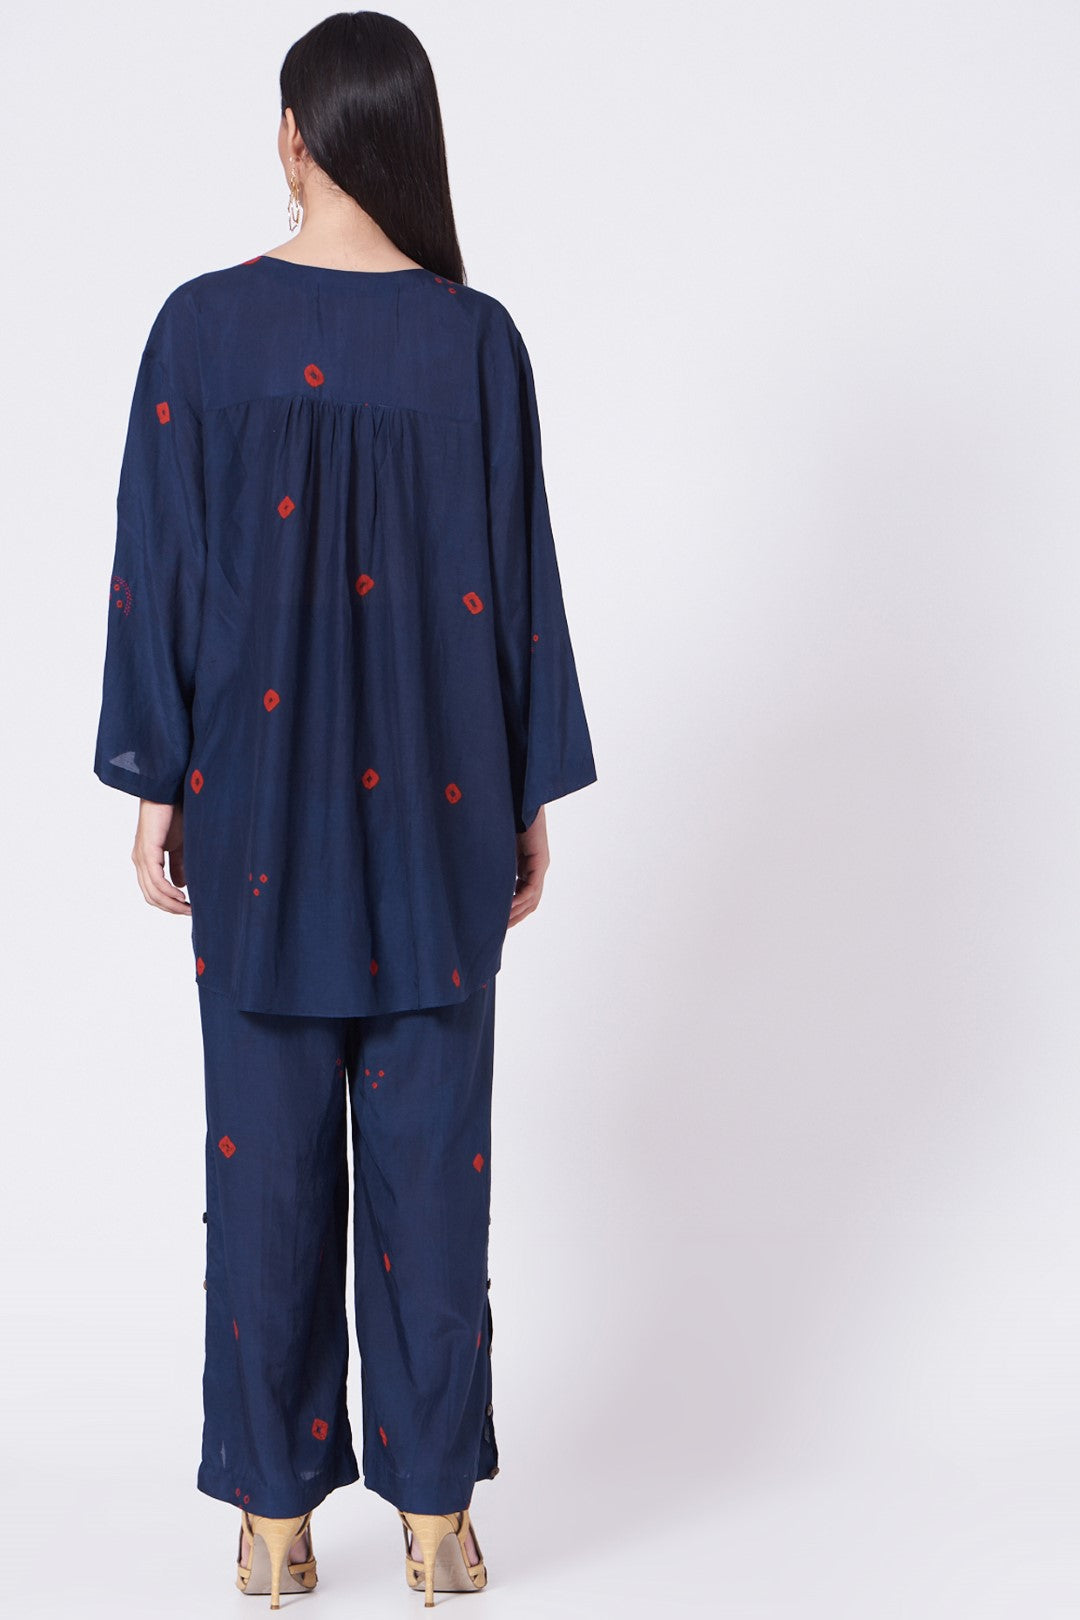 Blue And Red Bandhani Co-Ord